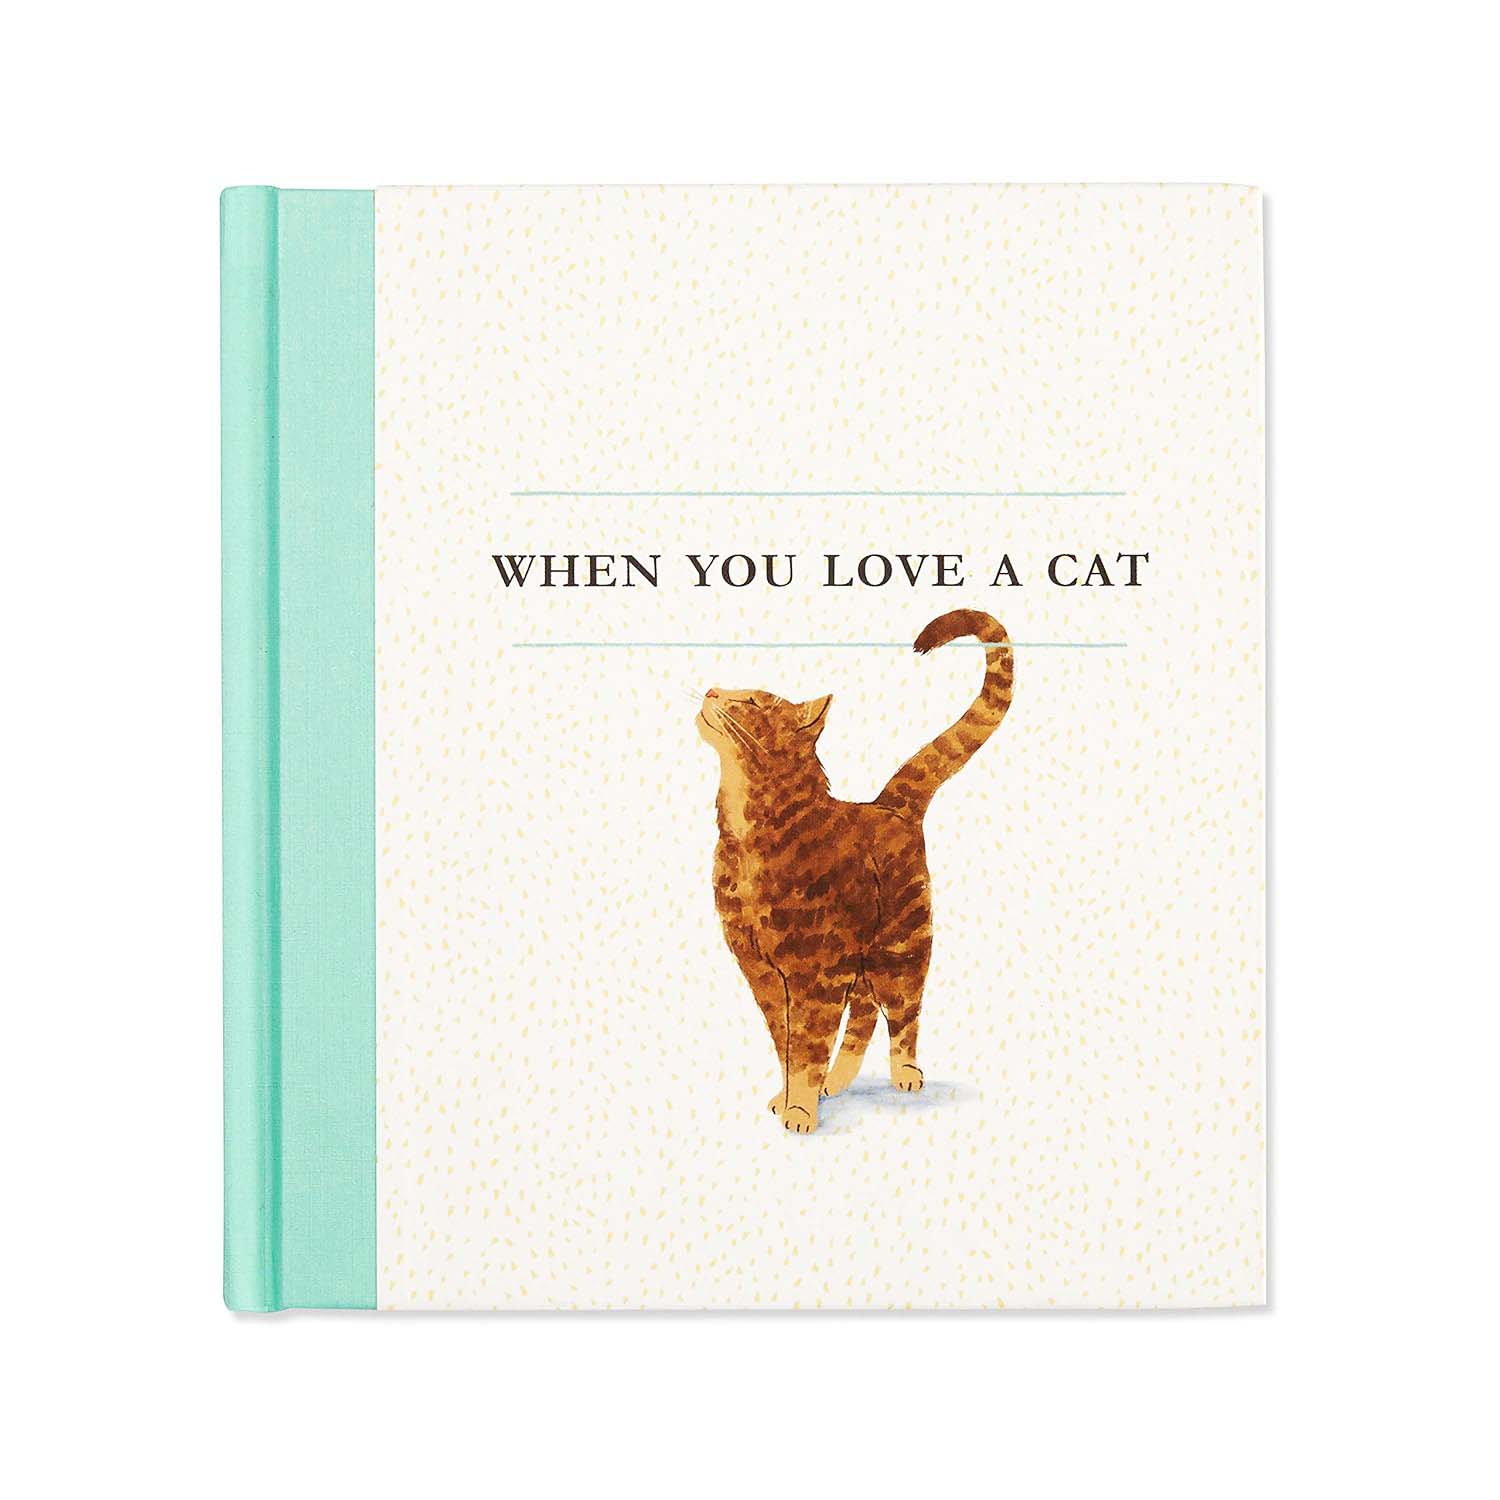 The book "When You Love a Cat" shows a cute orange cat illustration on the cover.